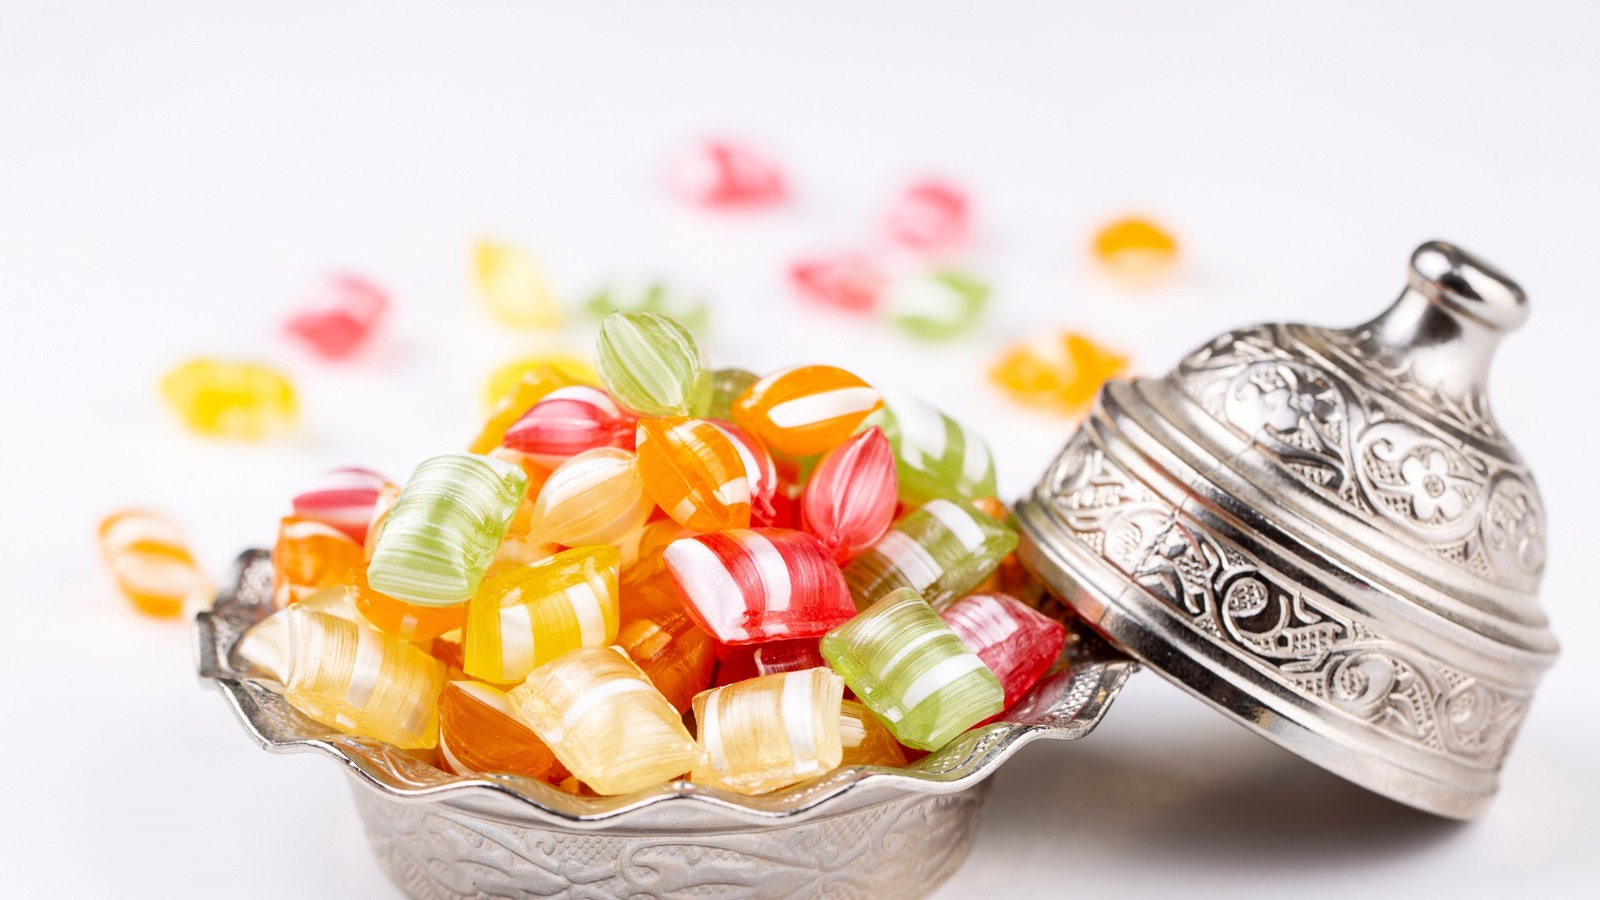 https://www.thedailymeal.com/img/gallery/how-important-is-a-candy-thermometer-when-making-your-own-sweets/l-intro-1693586235.jpg